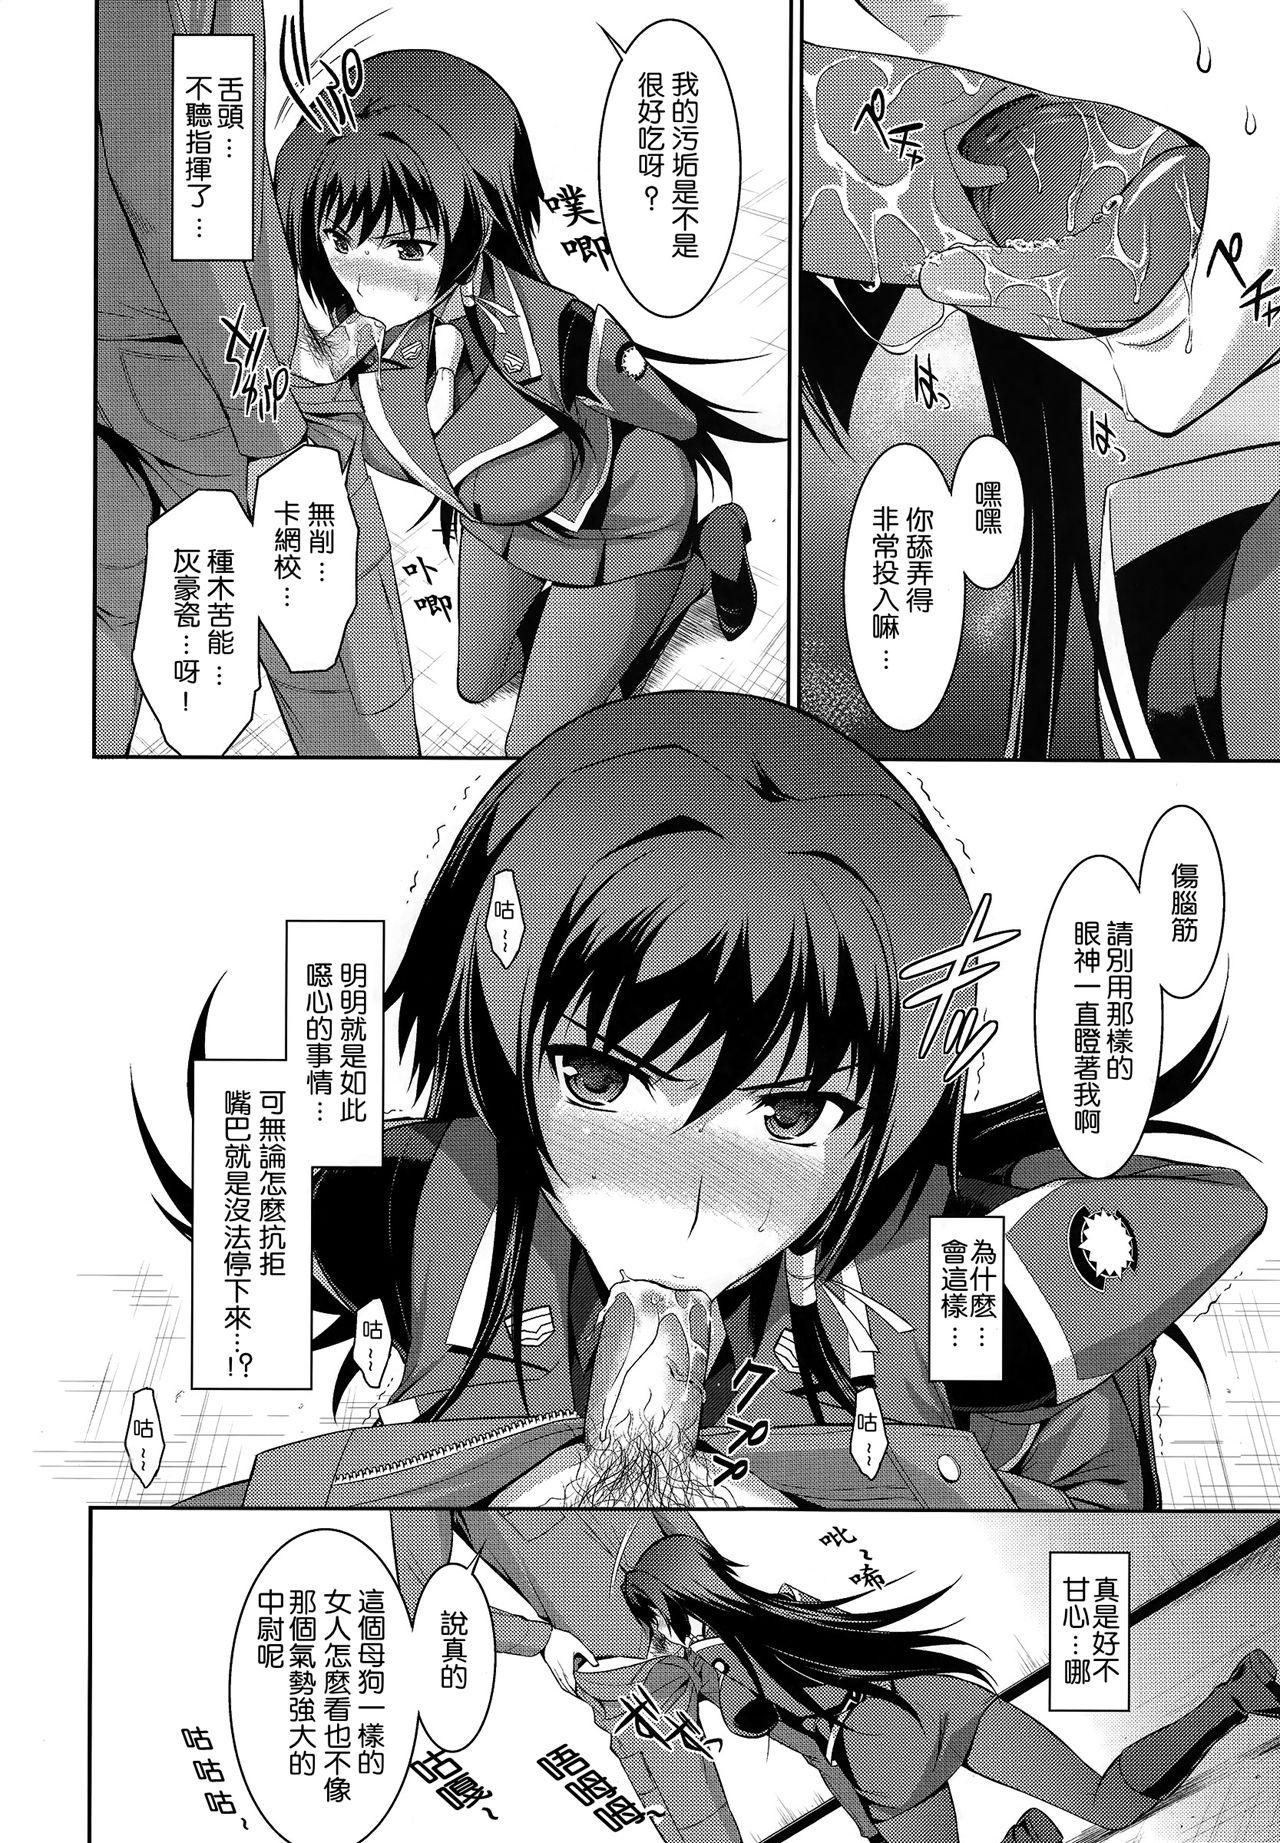 Yanks Featured Ouka Chiru! - Muv-luv alternative total eclipse Bedroom - Page 12